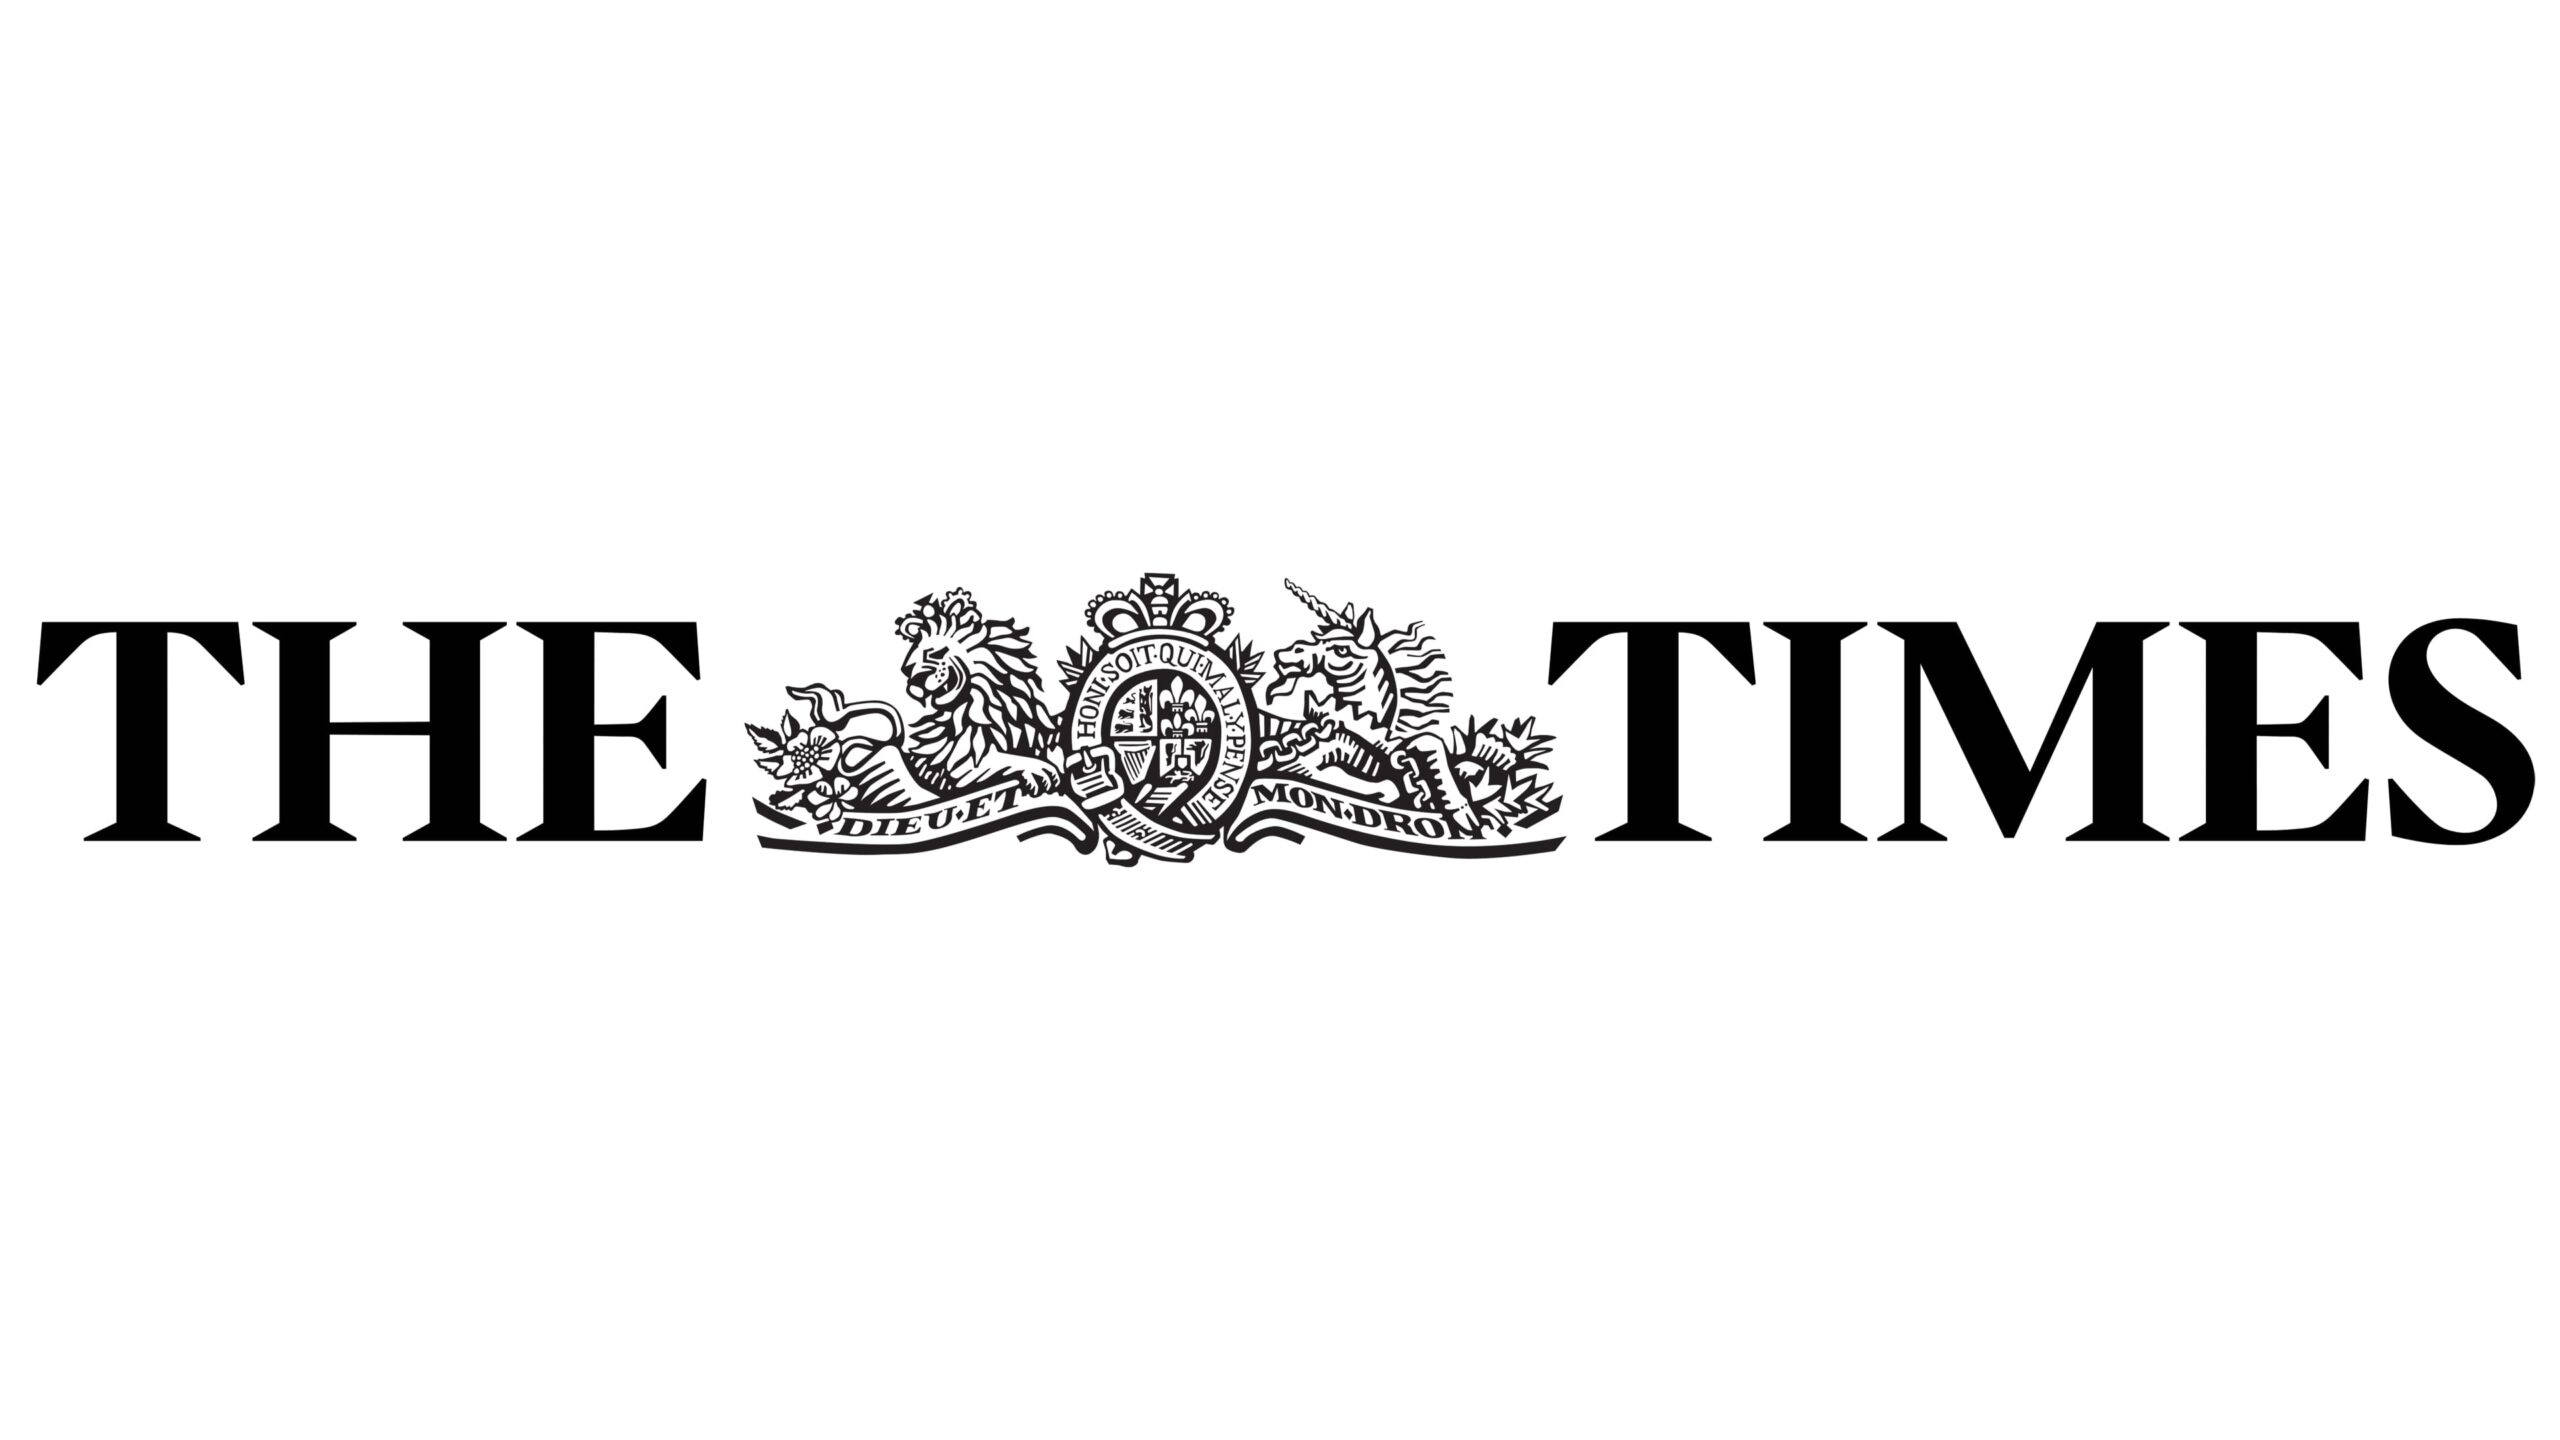 The-Times-Logo